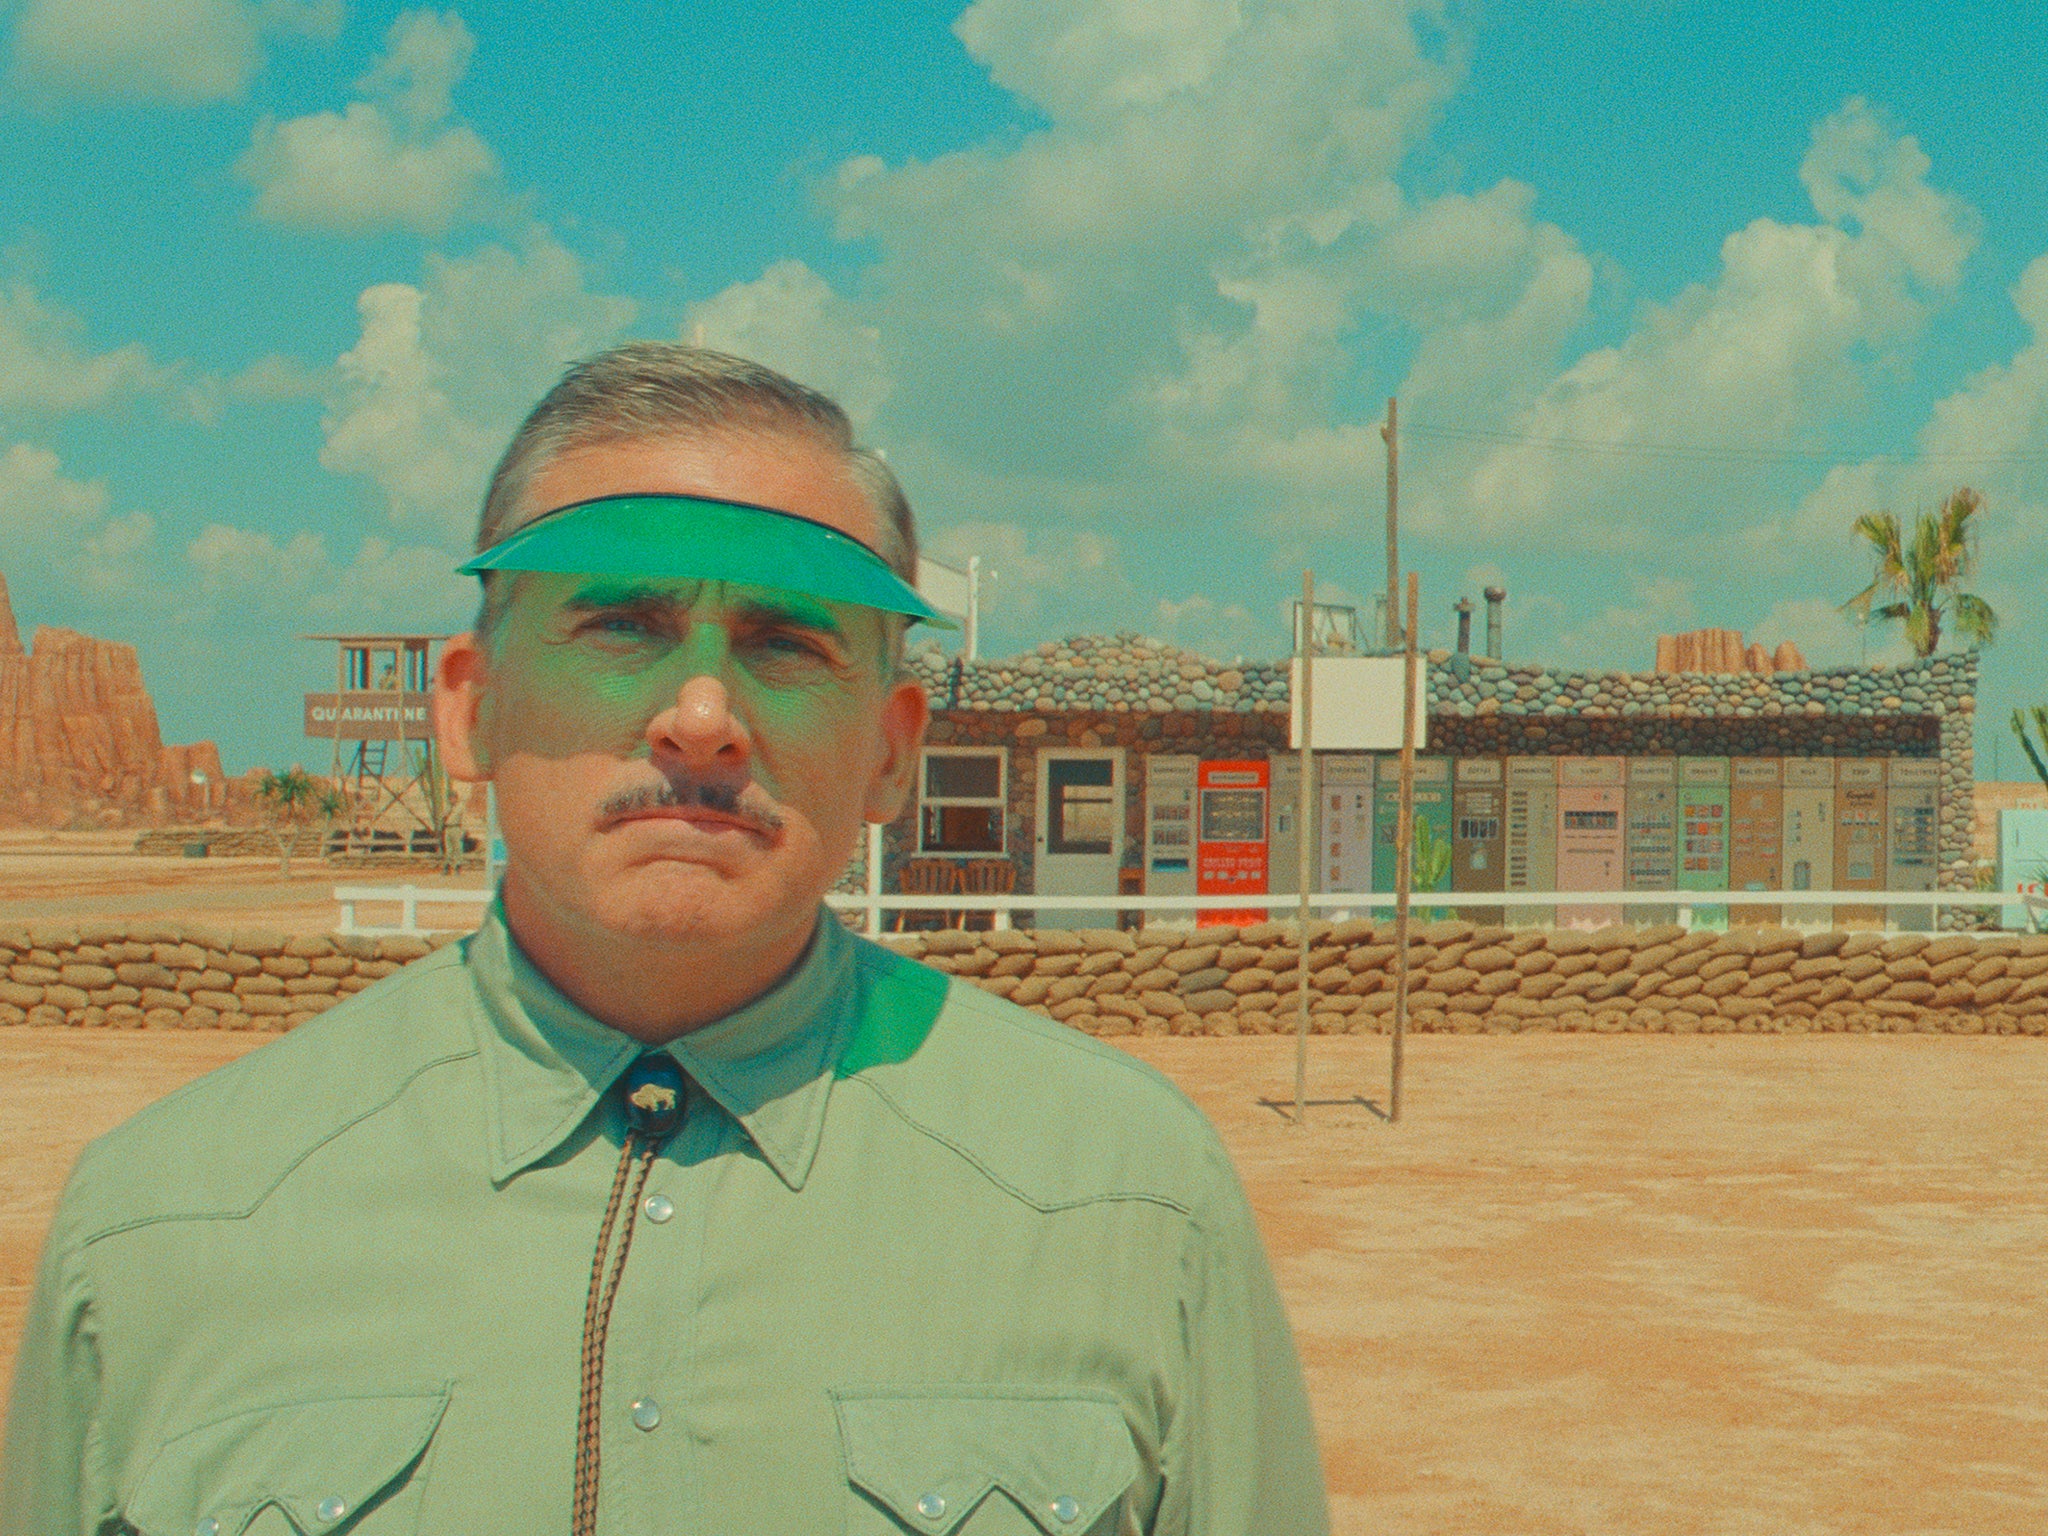 Wes Anderson AI Art Style - Quirky Symmetry and Pastel Palettes